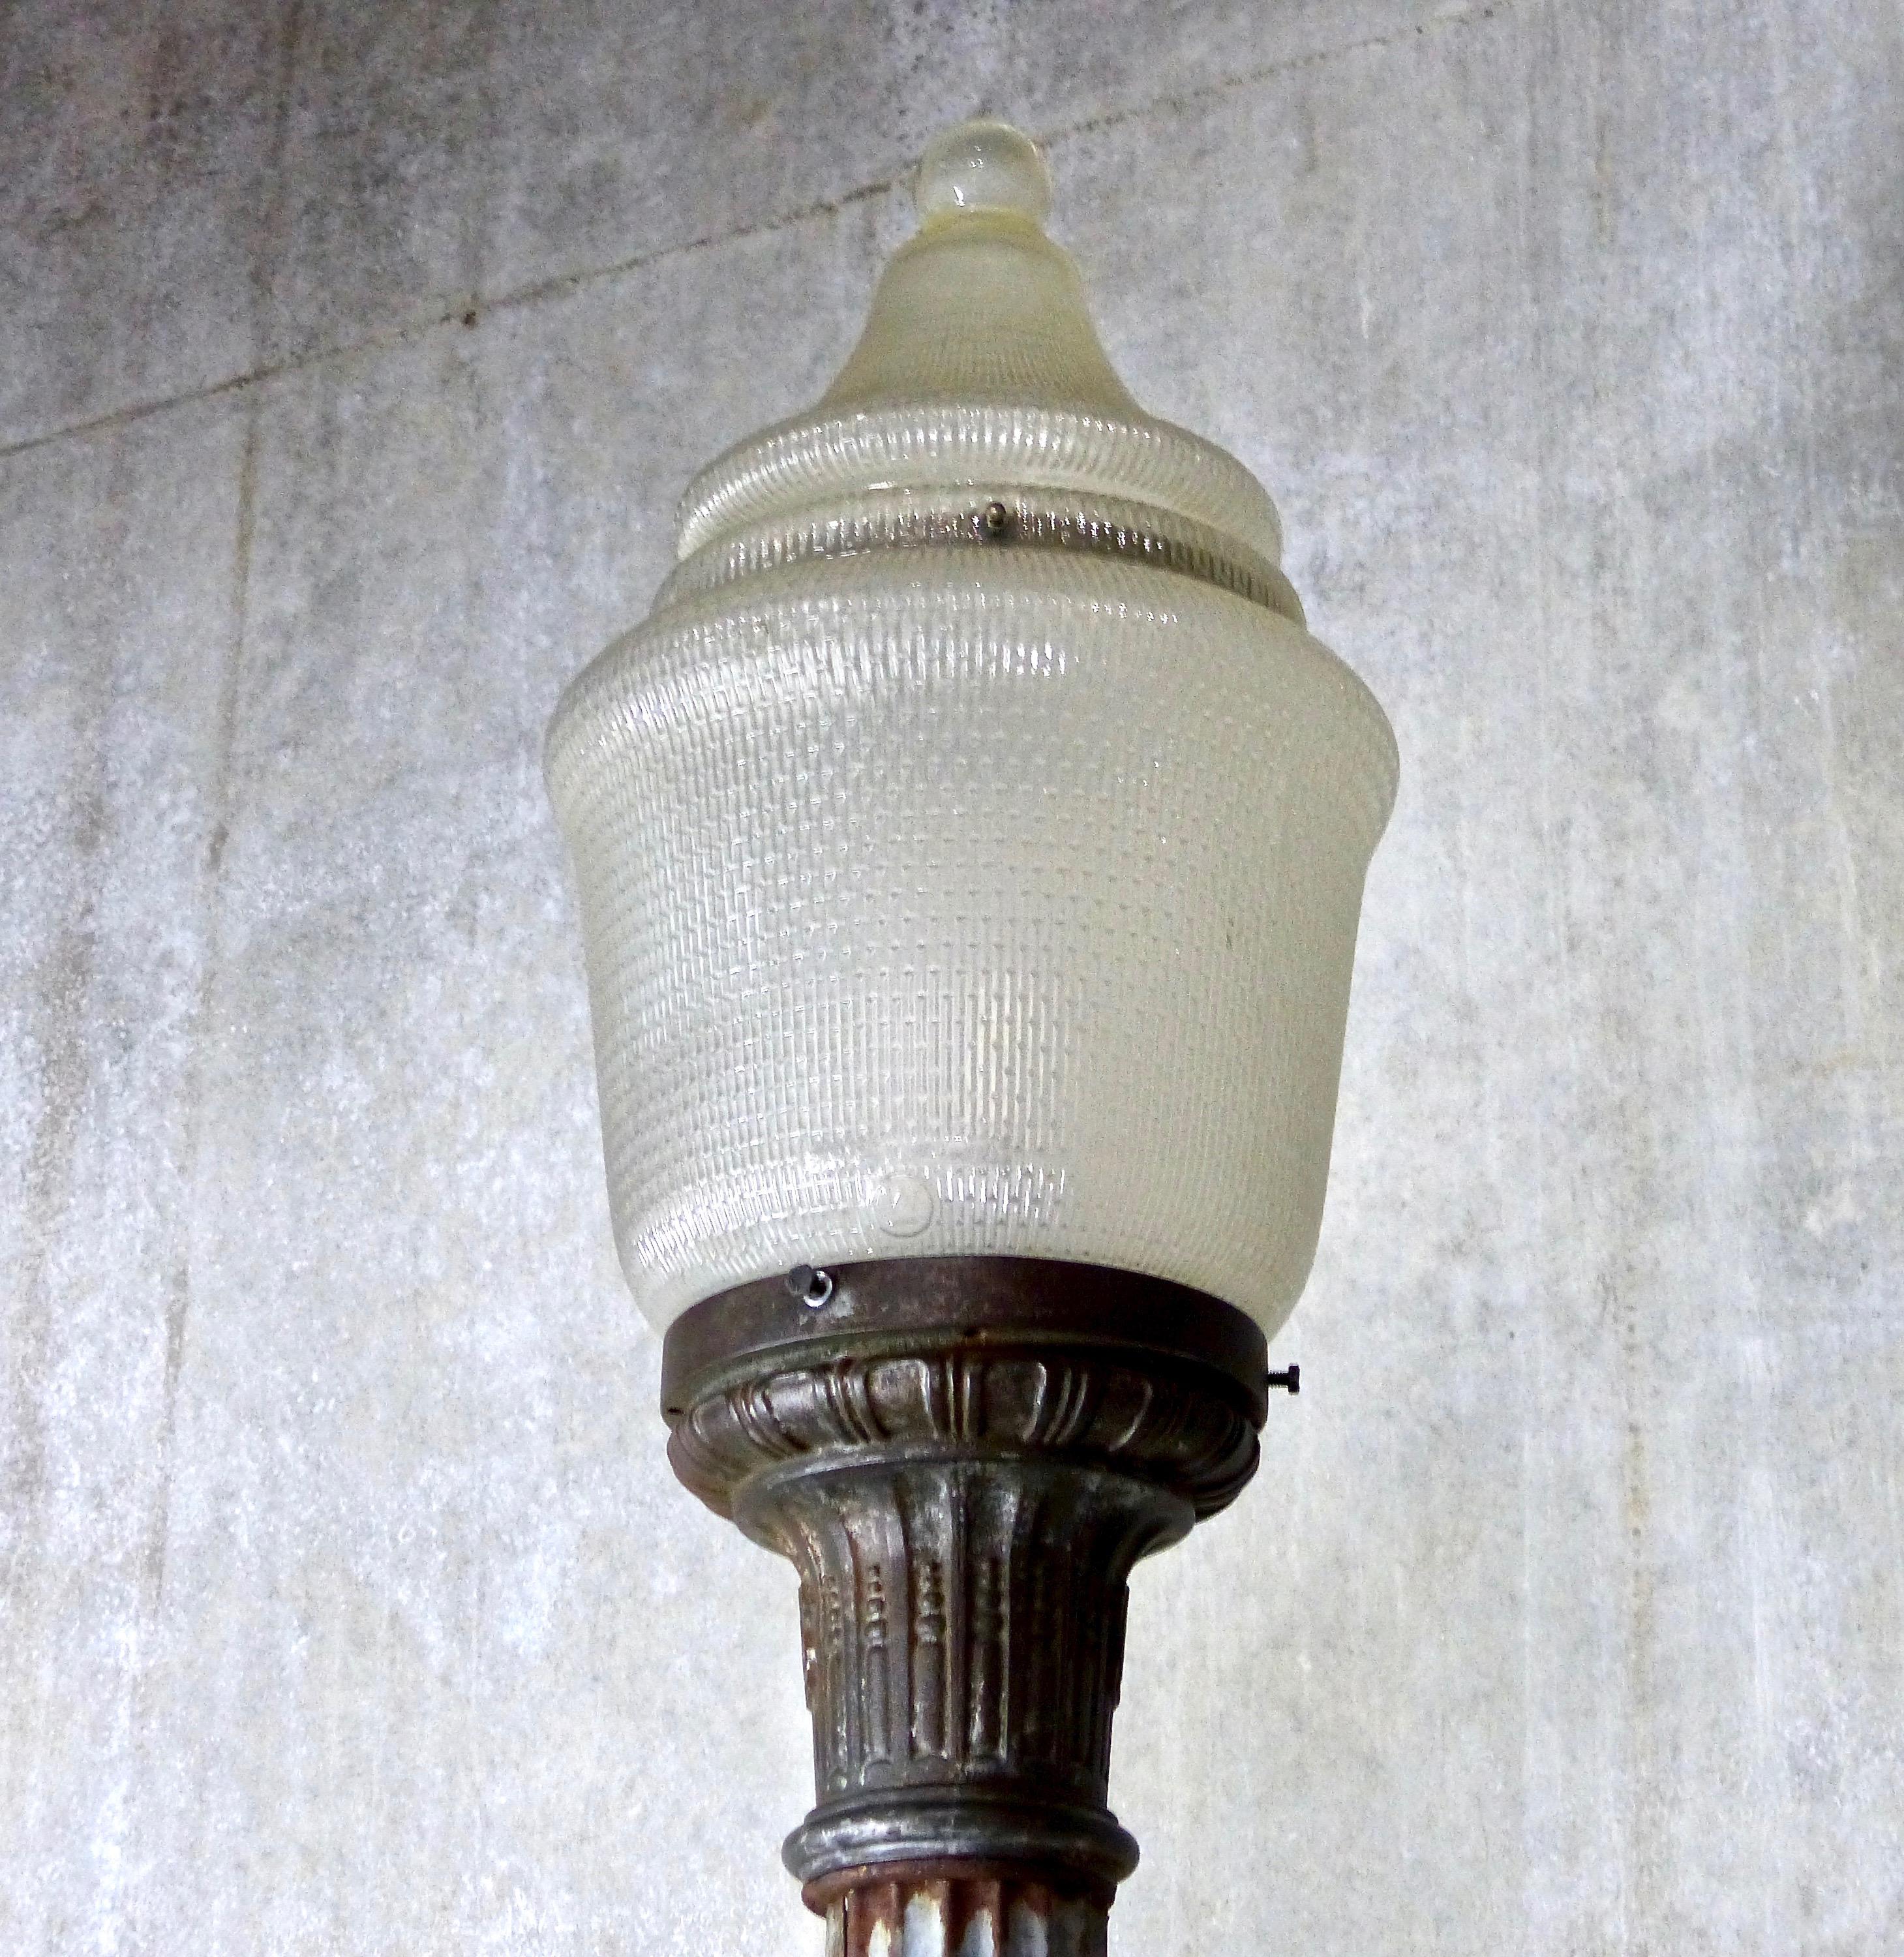 An extraordinary, 10-foot high American made street lamp from the 1930s. Zinc fluted column with cast metal base and top lamp fitter. Includes the original glass acorn shade. Rare and spectacular!
fully functional.